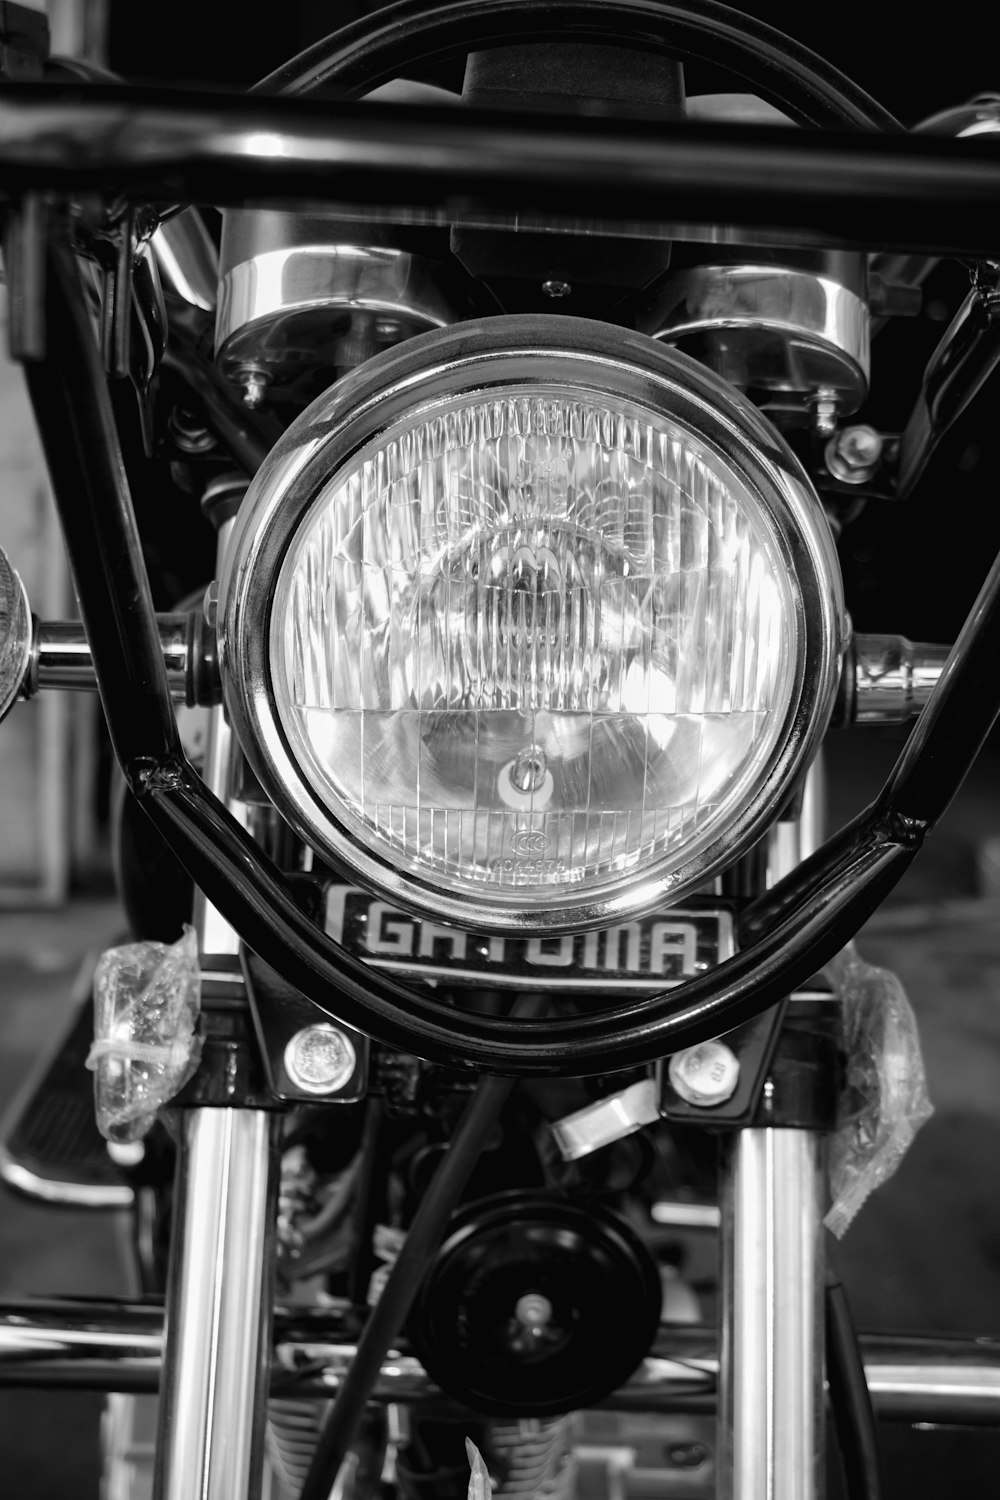 a close up of the headlight of a motorcycle